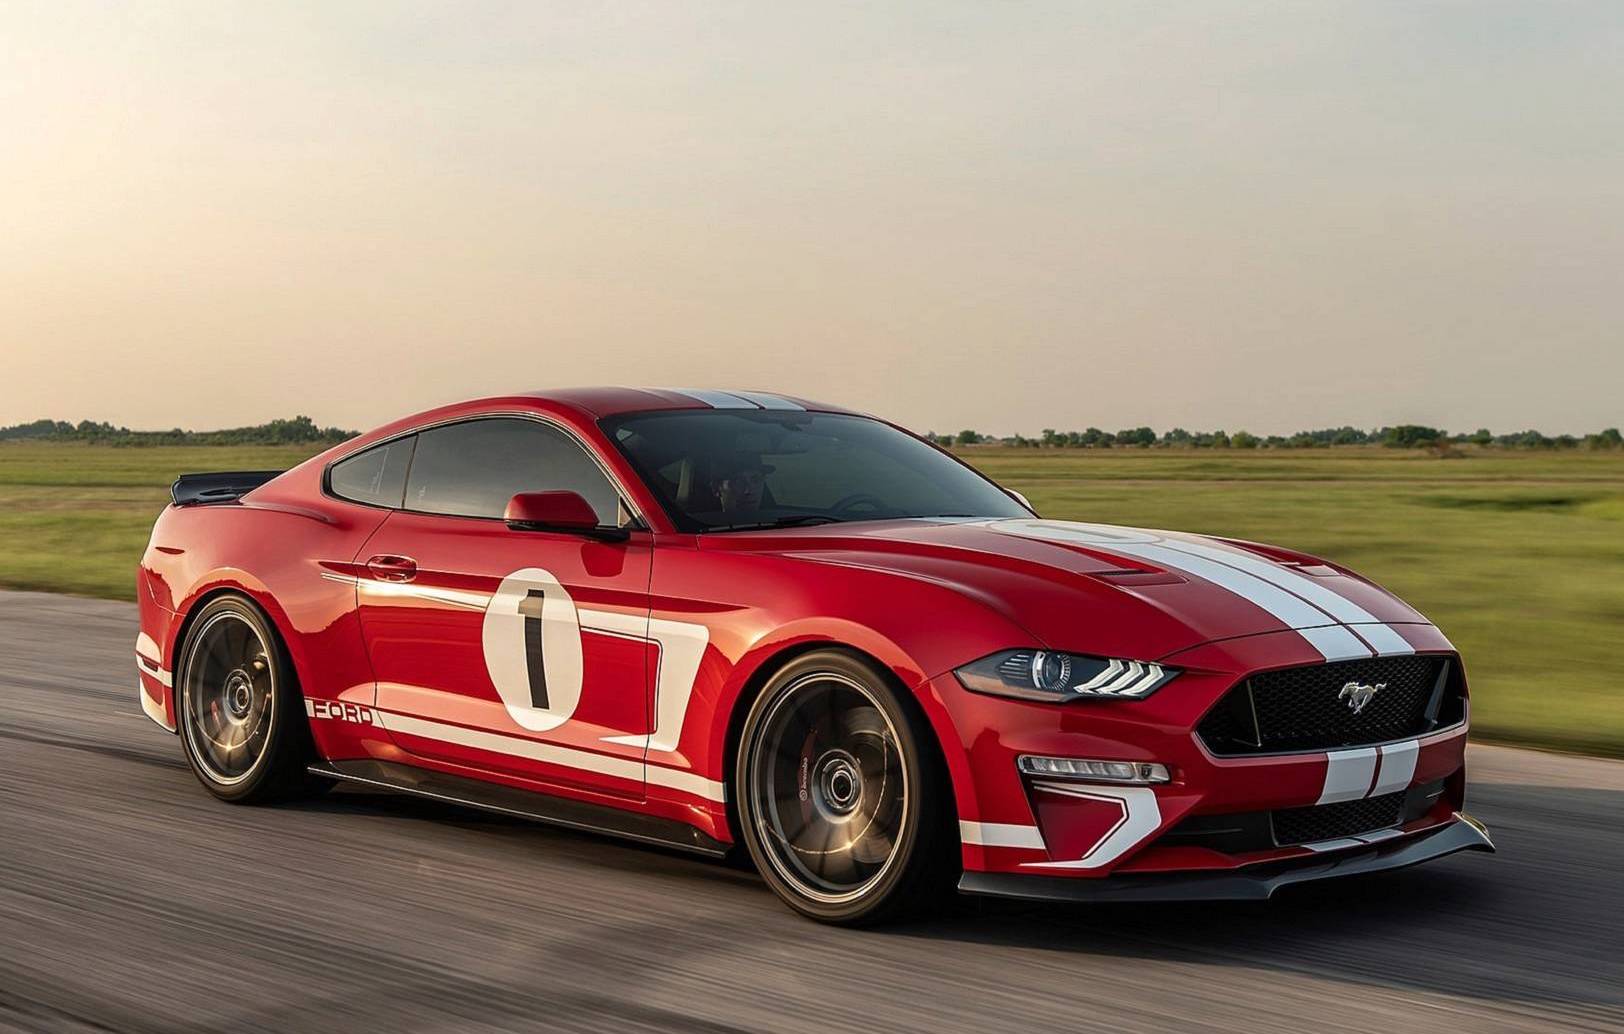 800hp Hennessey Heritage Edition Mustang announced (video)